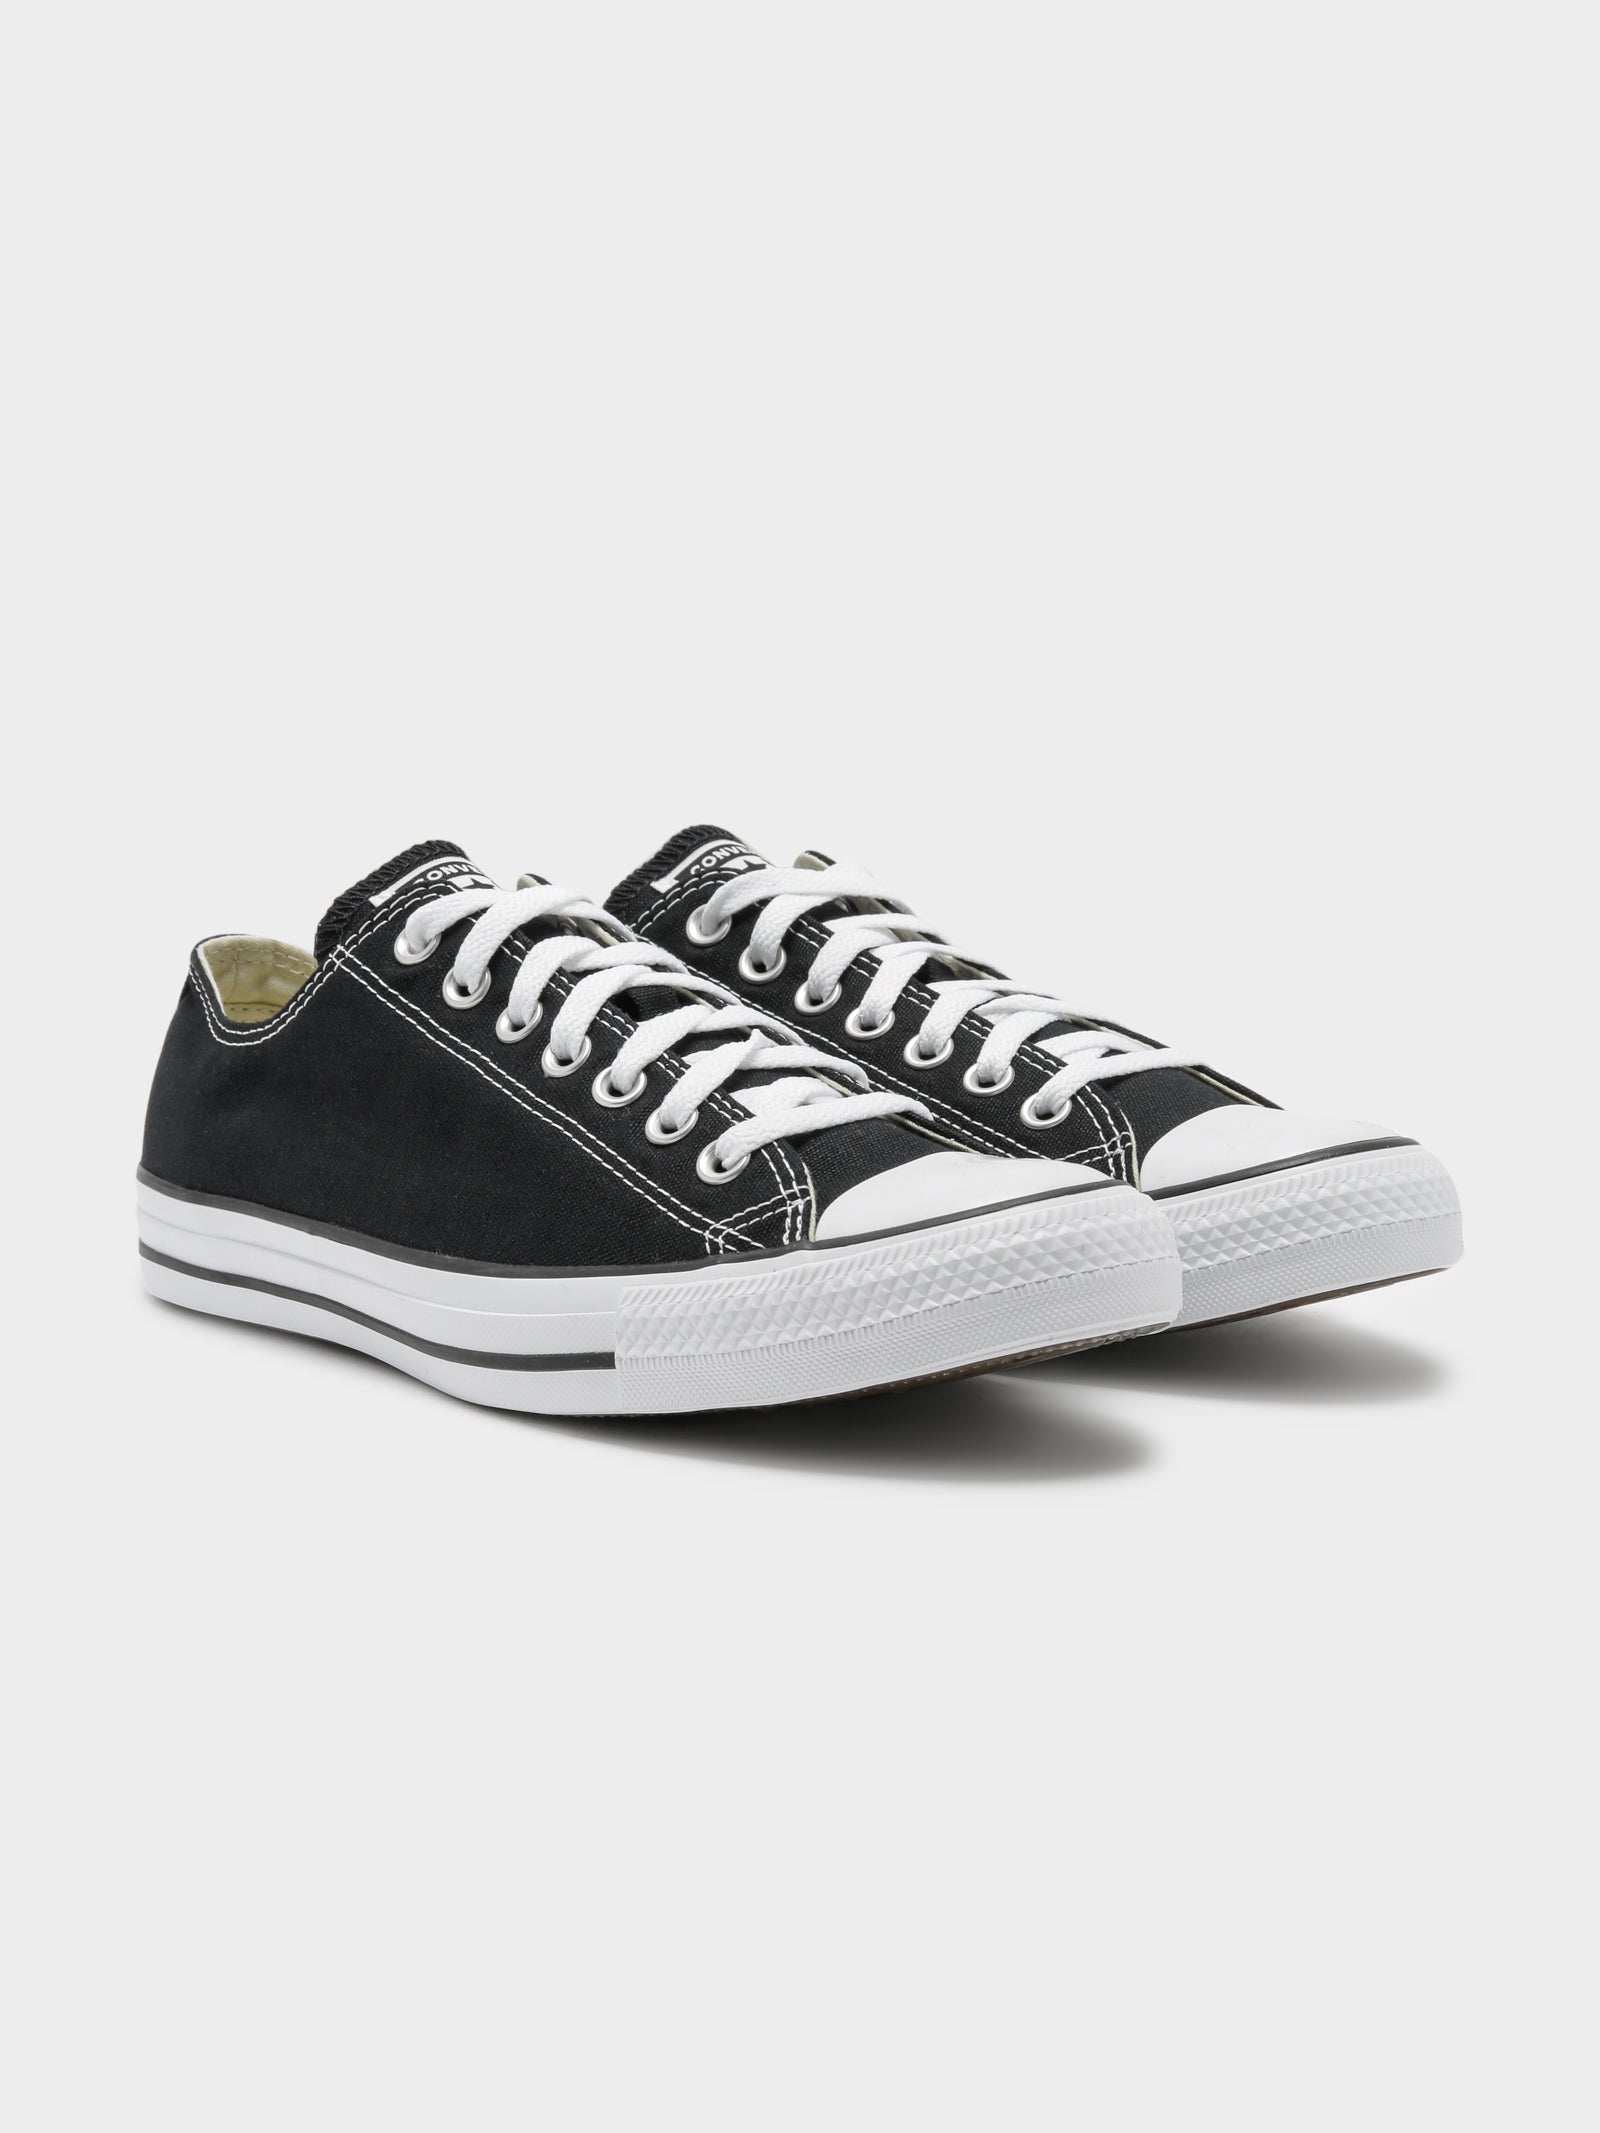 Unisex Chuck Taylor All Star Classic Low-Top Sneakers in Black - Glue Store